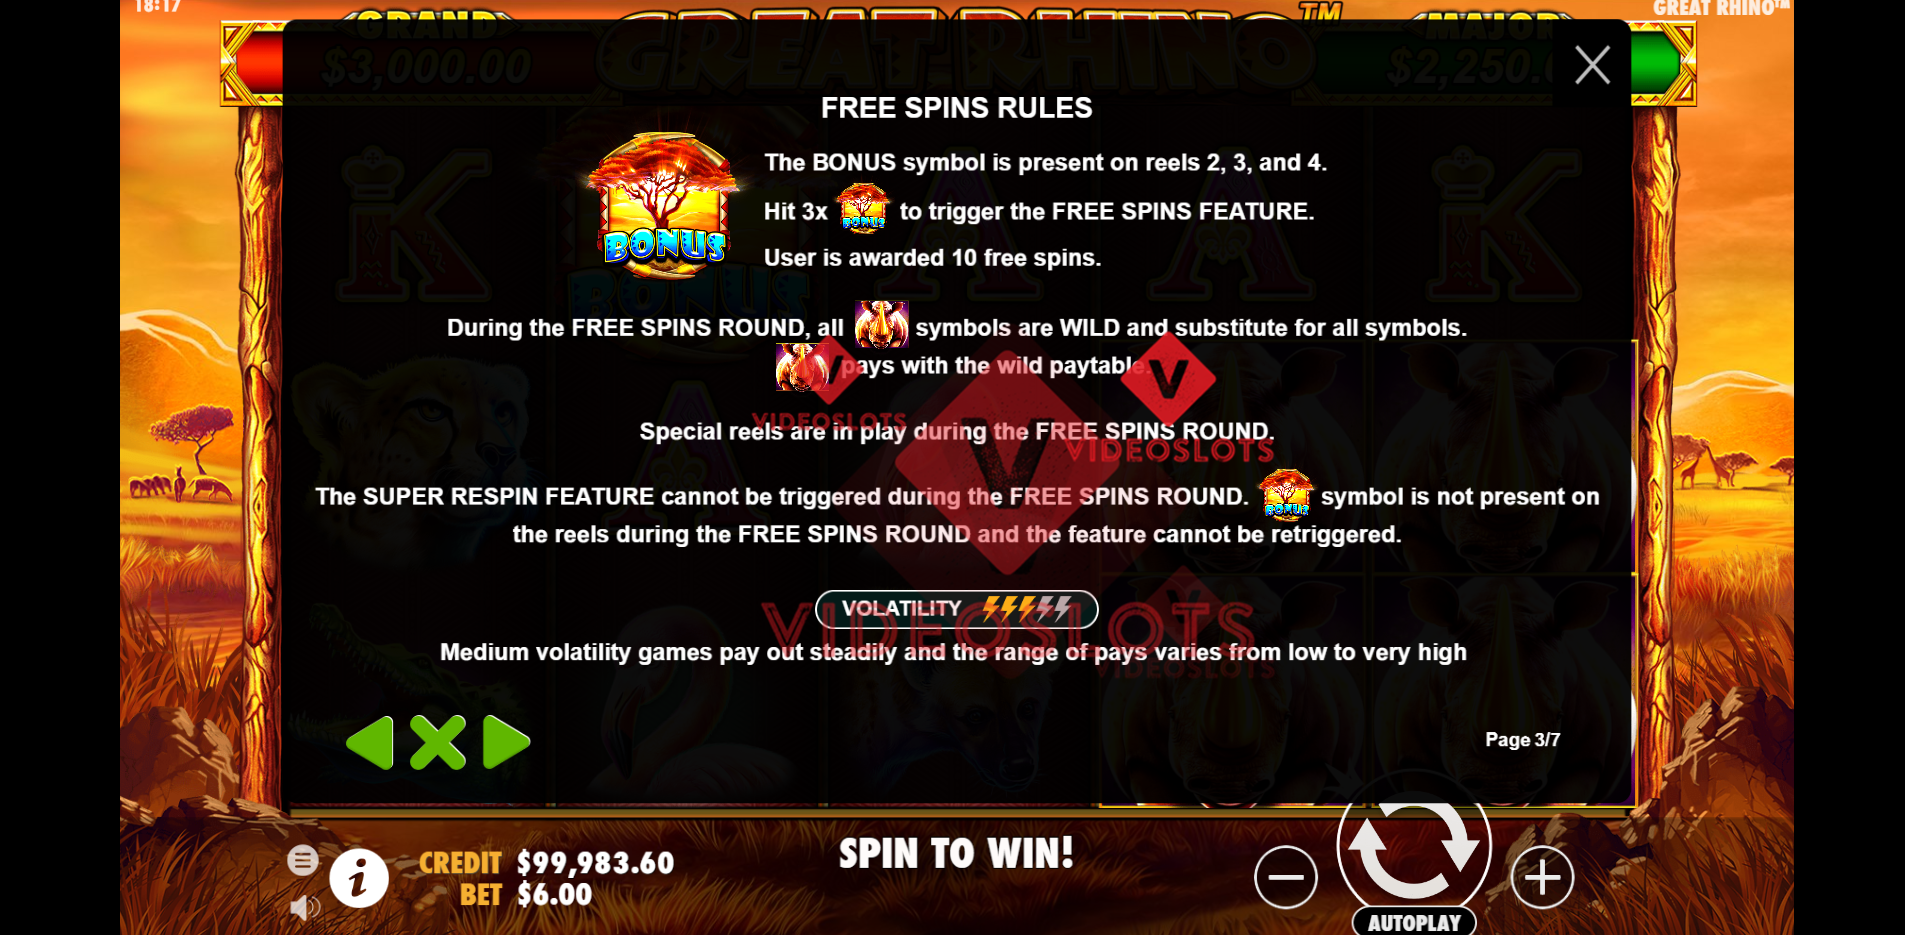 Game Rules for Great Rhino slot by Pragmatic Play